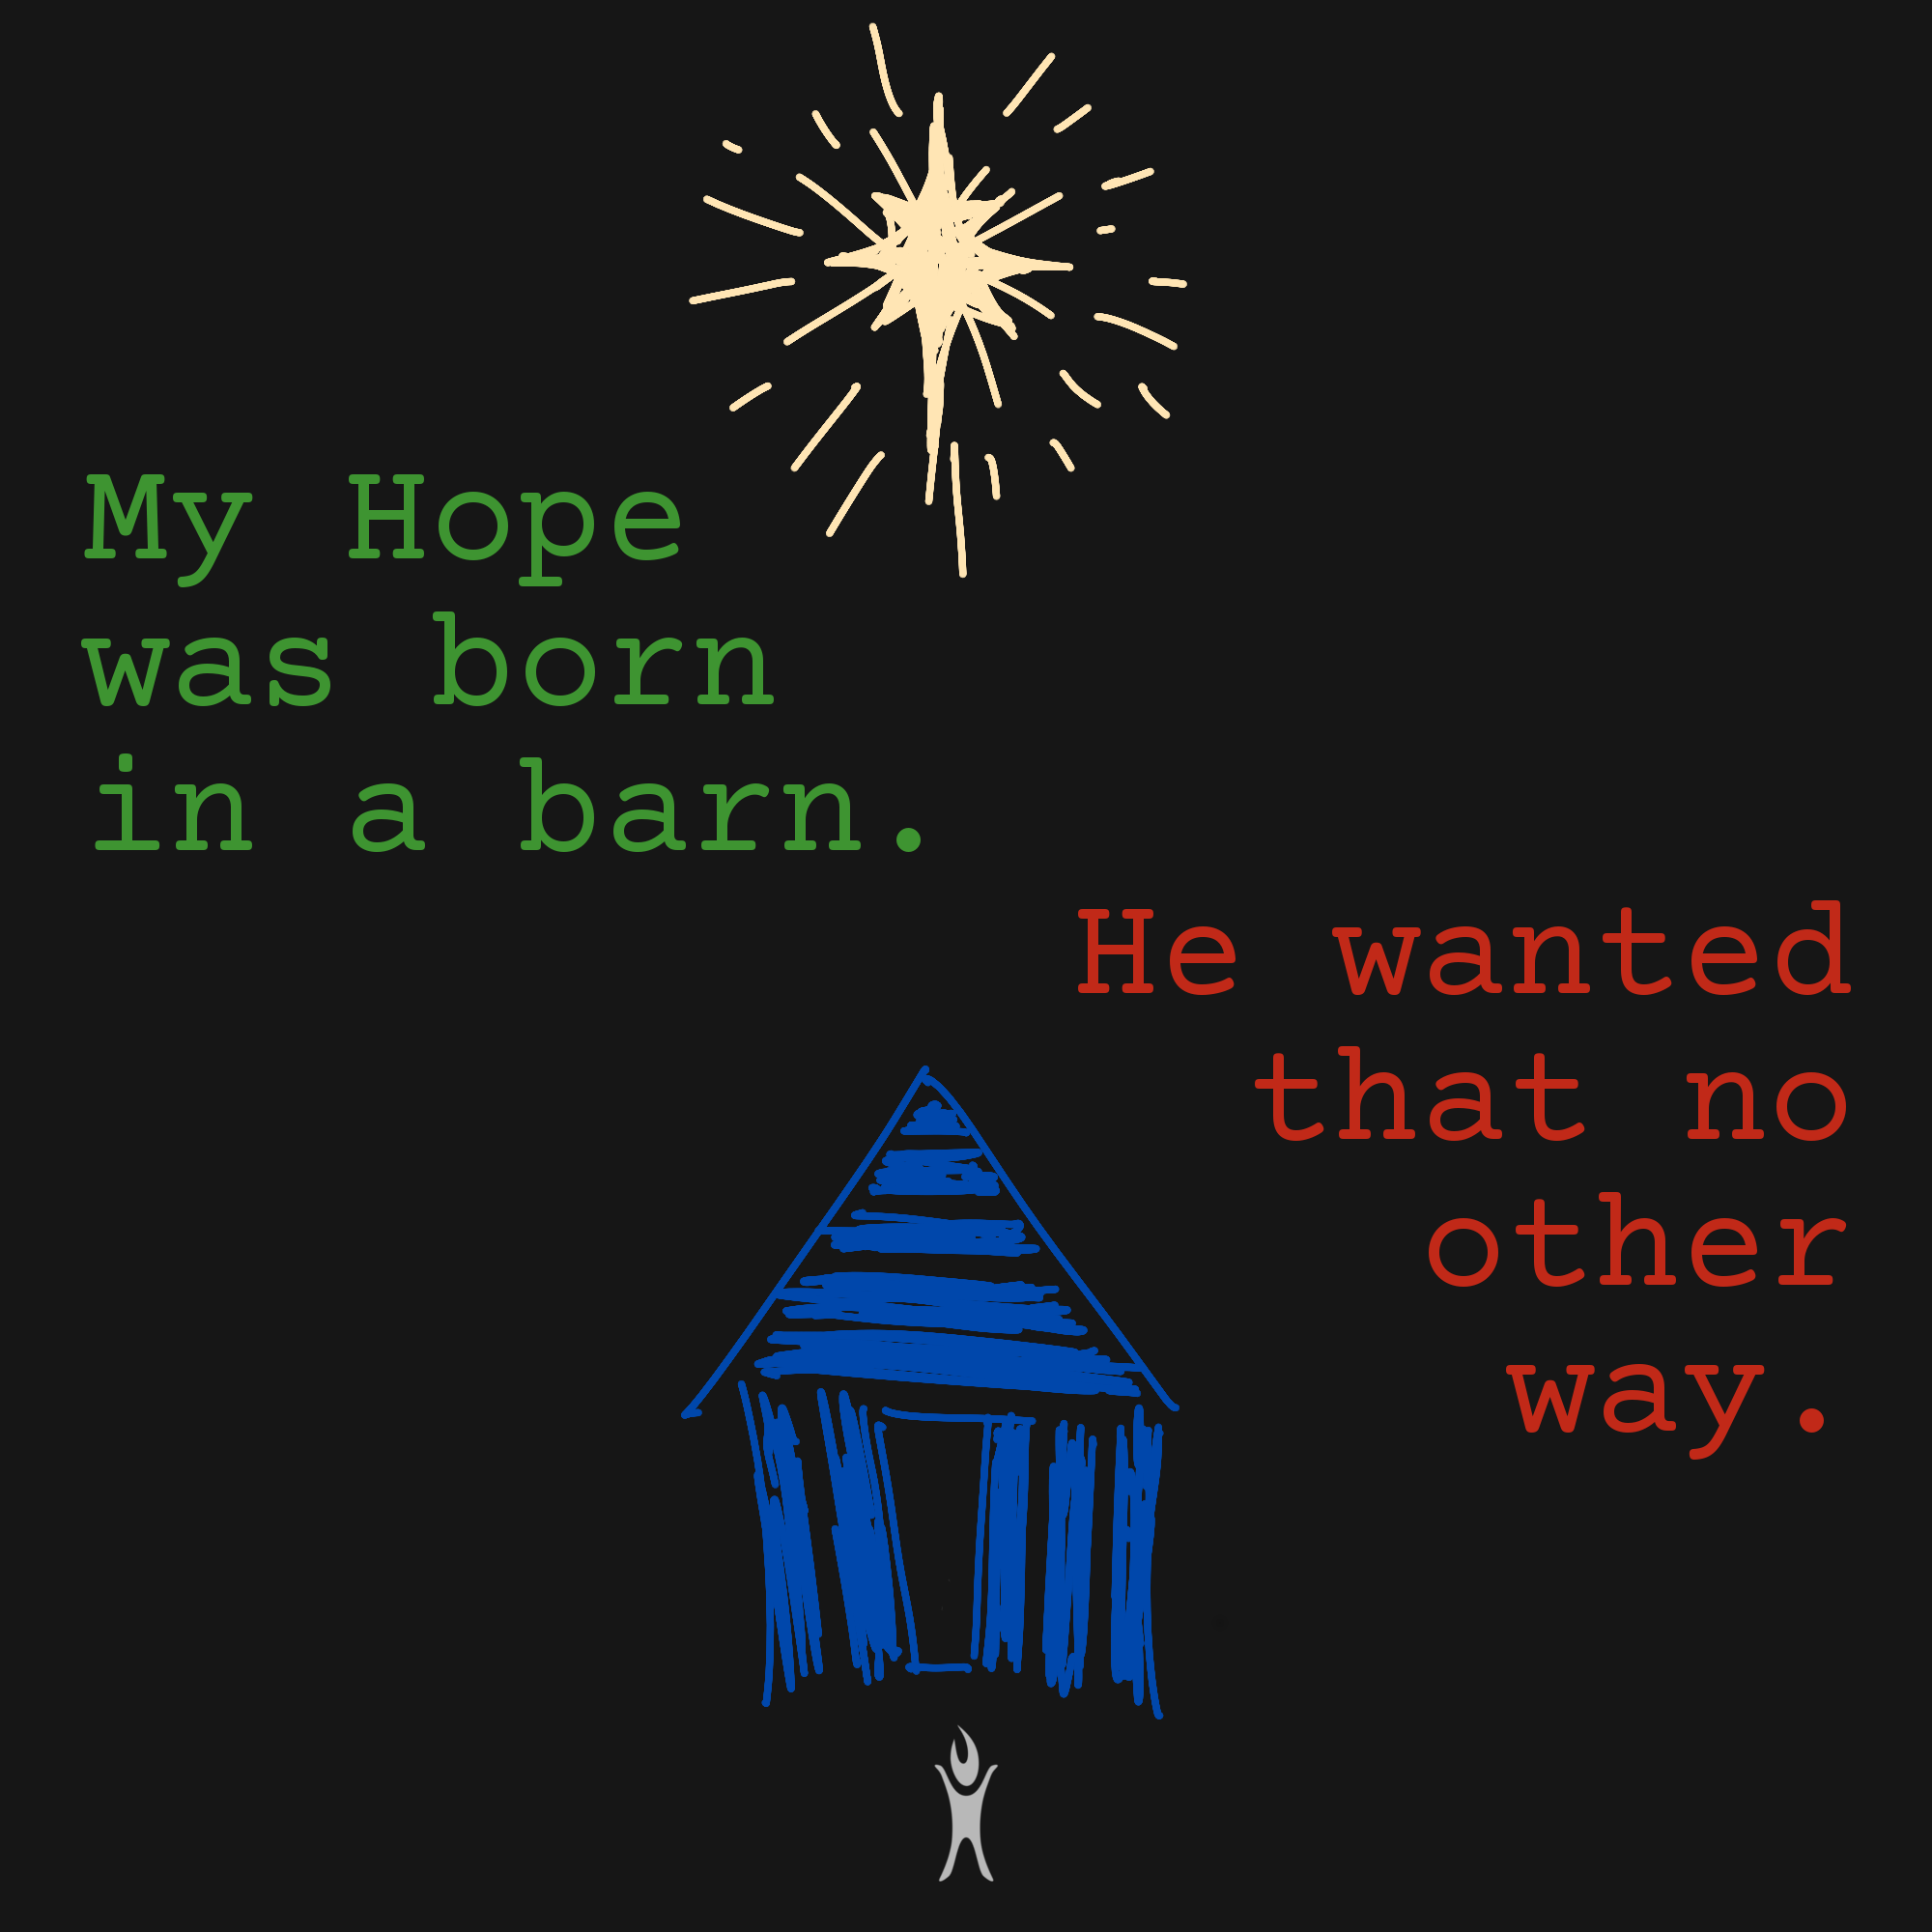 My Hope was born in a barn. He wanted that no other way.